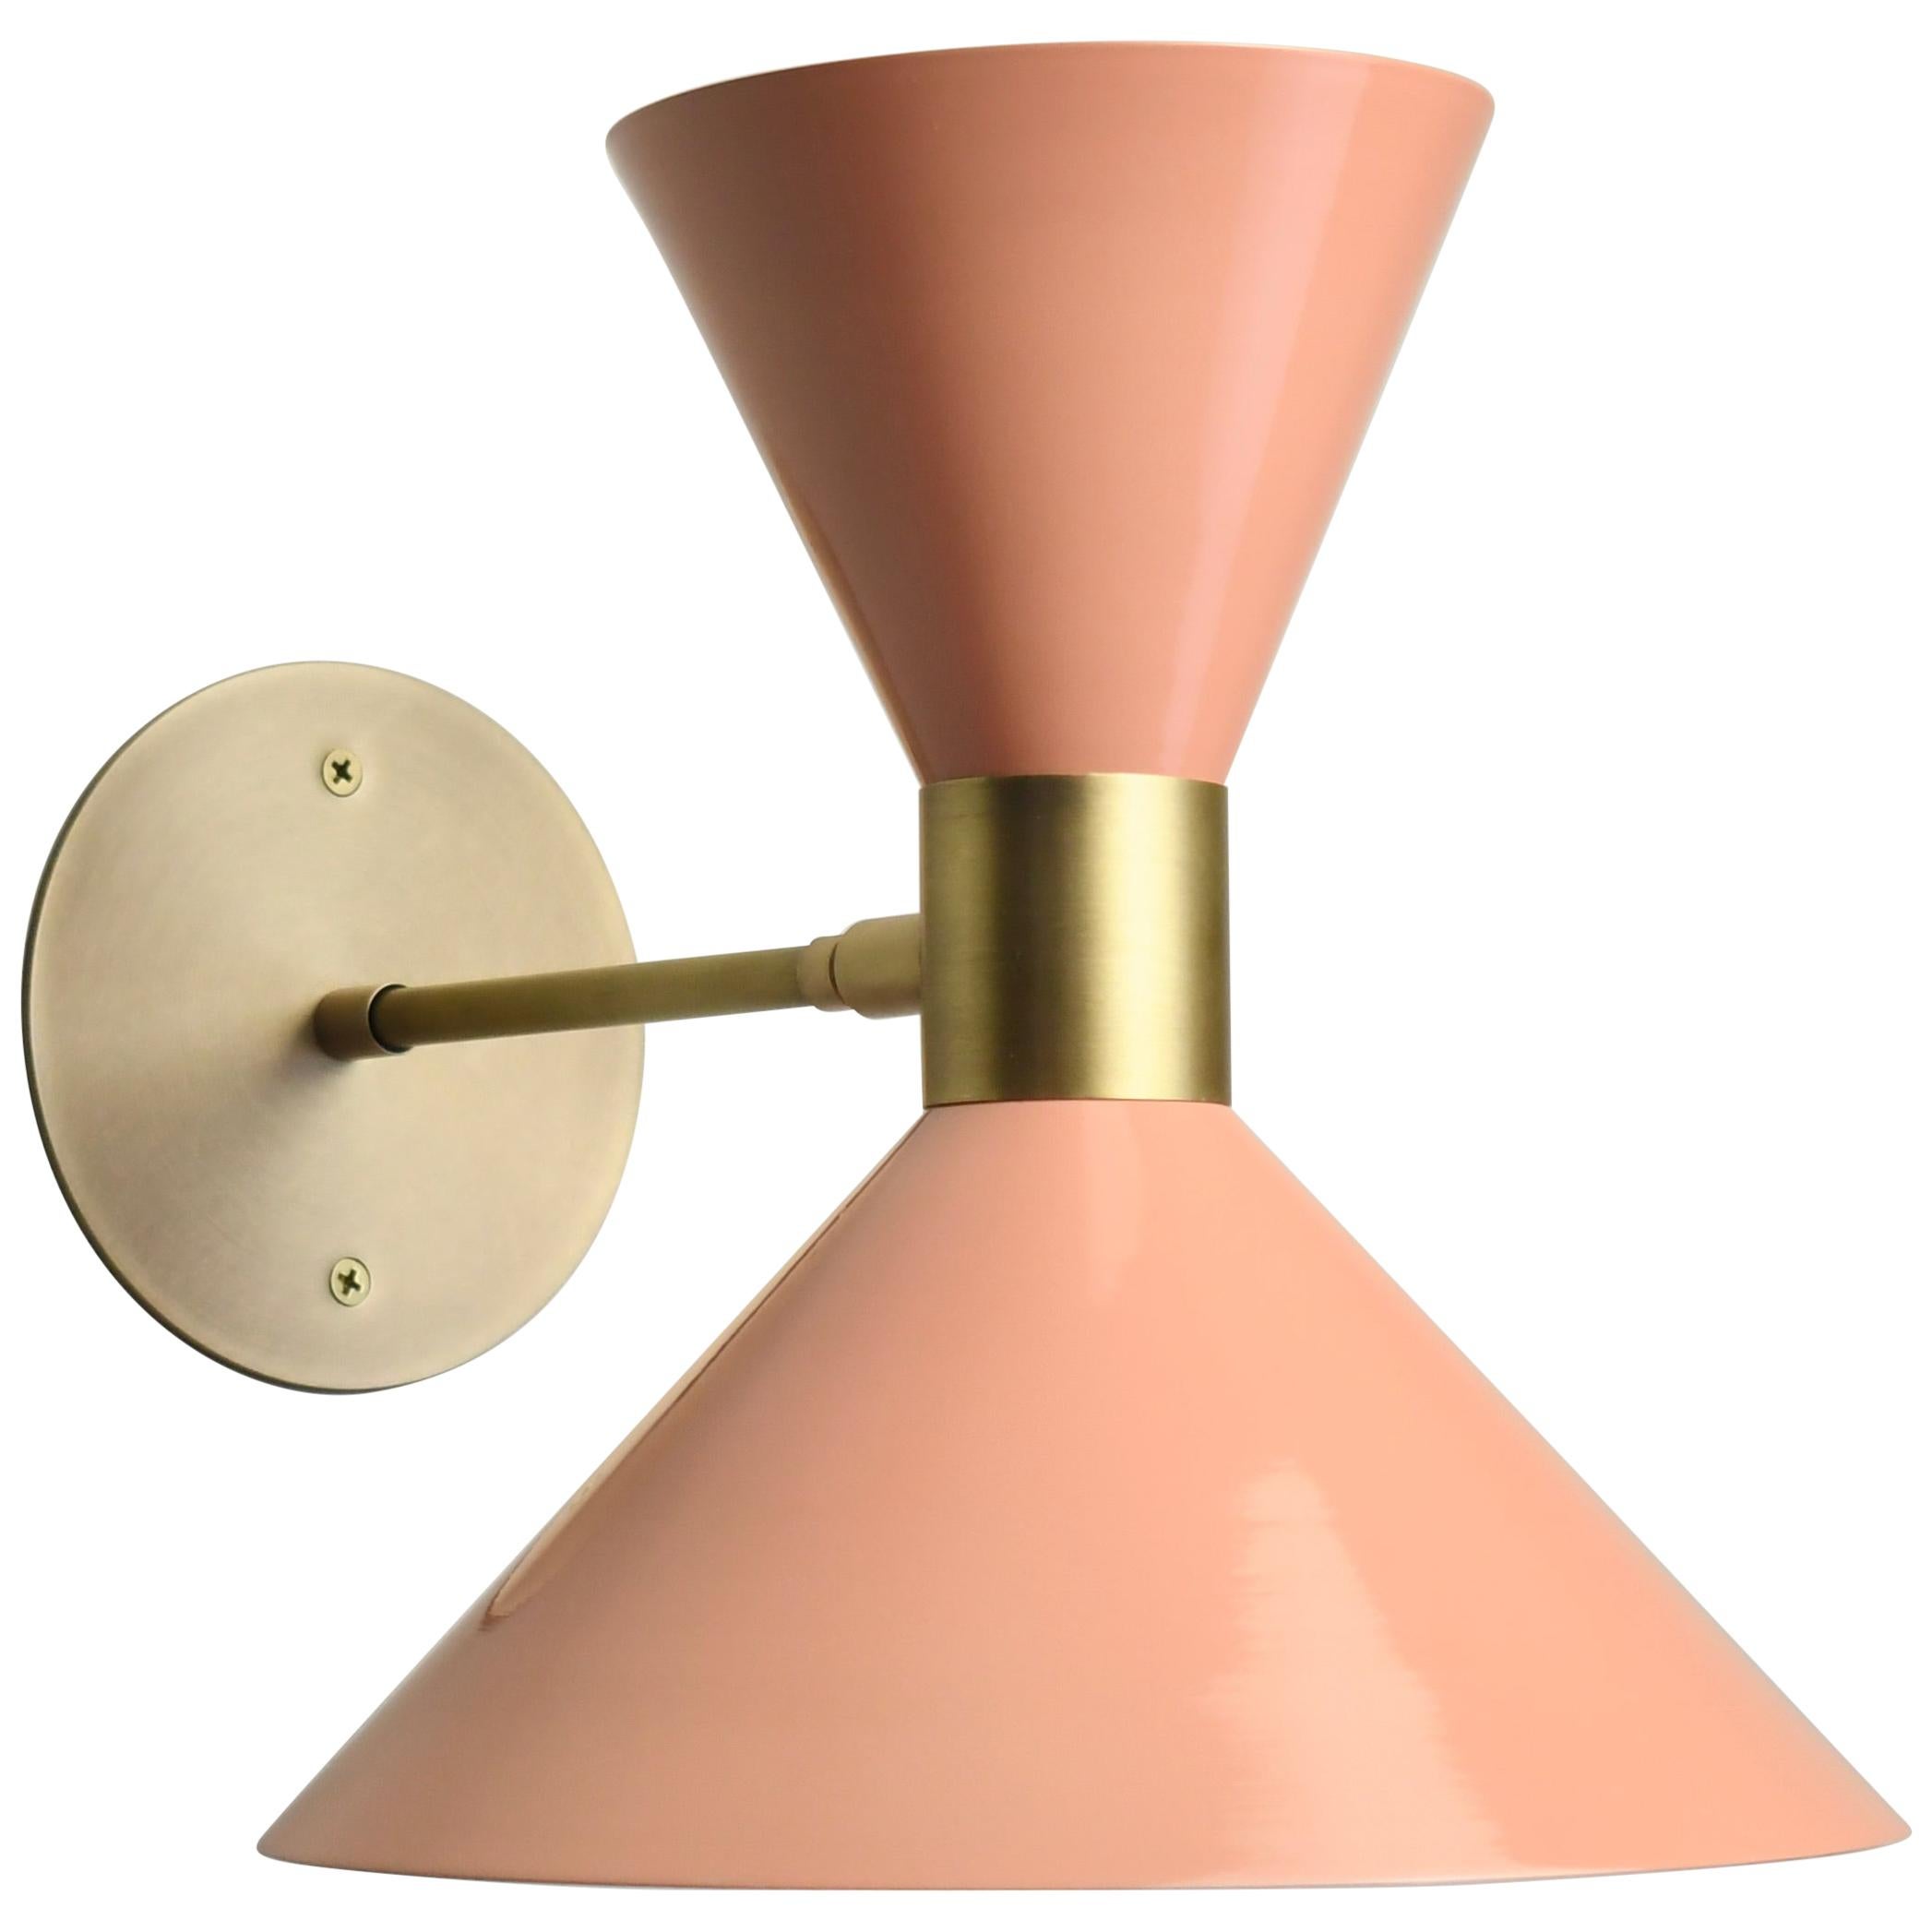 Details about   Mid-Century Modern Wall Sconce Single Light LED Warm White Wall Light In Brass 